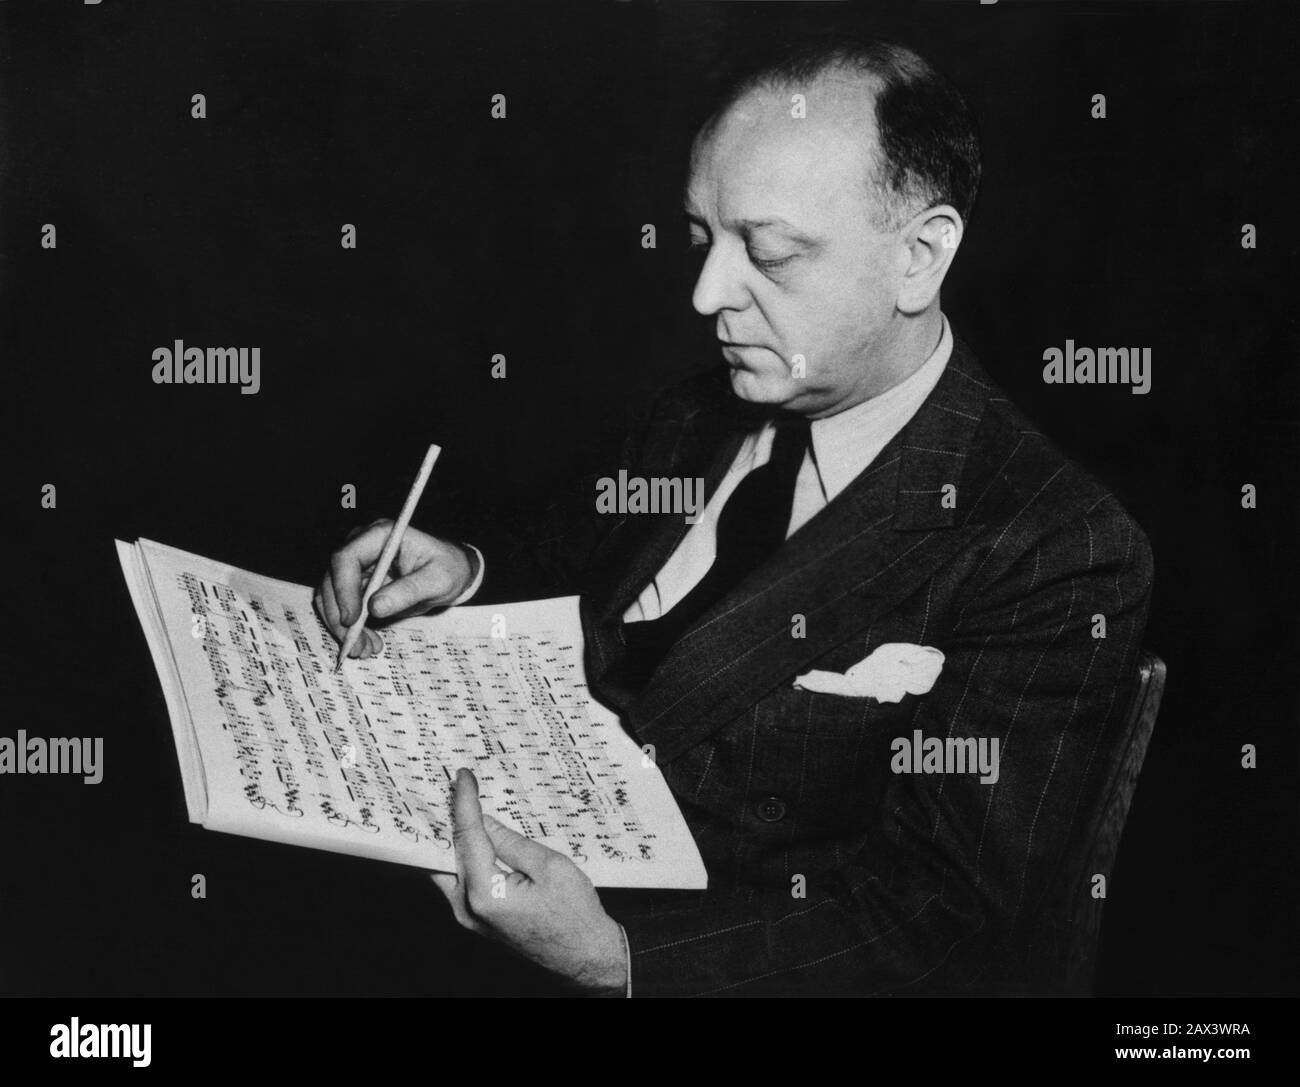 1956  , USA : The celebrated american music composer and critic VIRGIL THOMSON ( 1896 - 1989 ). He was instrumental in the development of the ' American Sound ' in classical music . Thomson became a sort of mentor and father figure to a new generation of American tonal composers such as Ned Rorem ,  Paul Bowles and Leonard Bernstein , a circle united as much by their shared homosexuality as by their similar compositional sensibilities  - OPERA LIRICA -  MUSIC - MUSICA CLASSICA - CLASSICAL - COMPOSITORE - GAY - omosessuale - omosessualità - LGBT -  - homosexual - homosexuality - spartito - prof Stock Photo